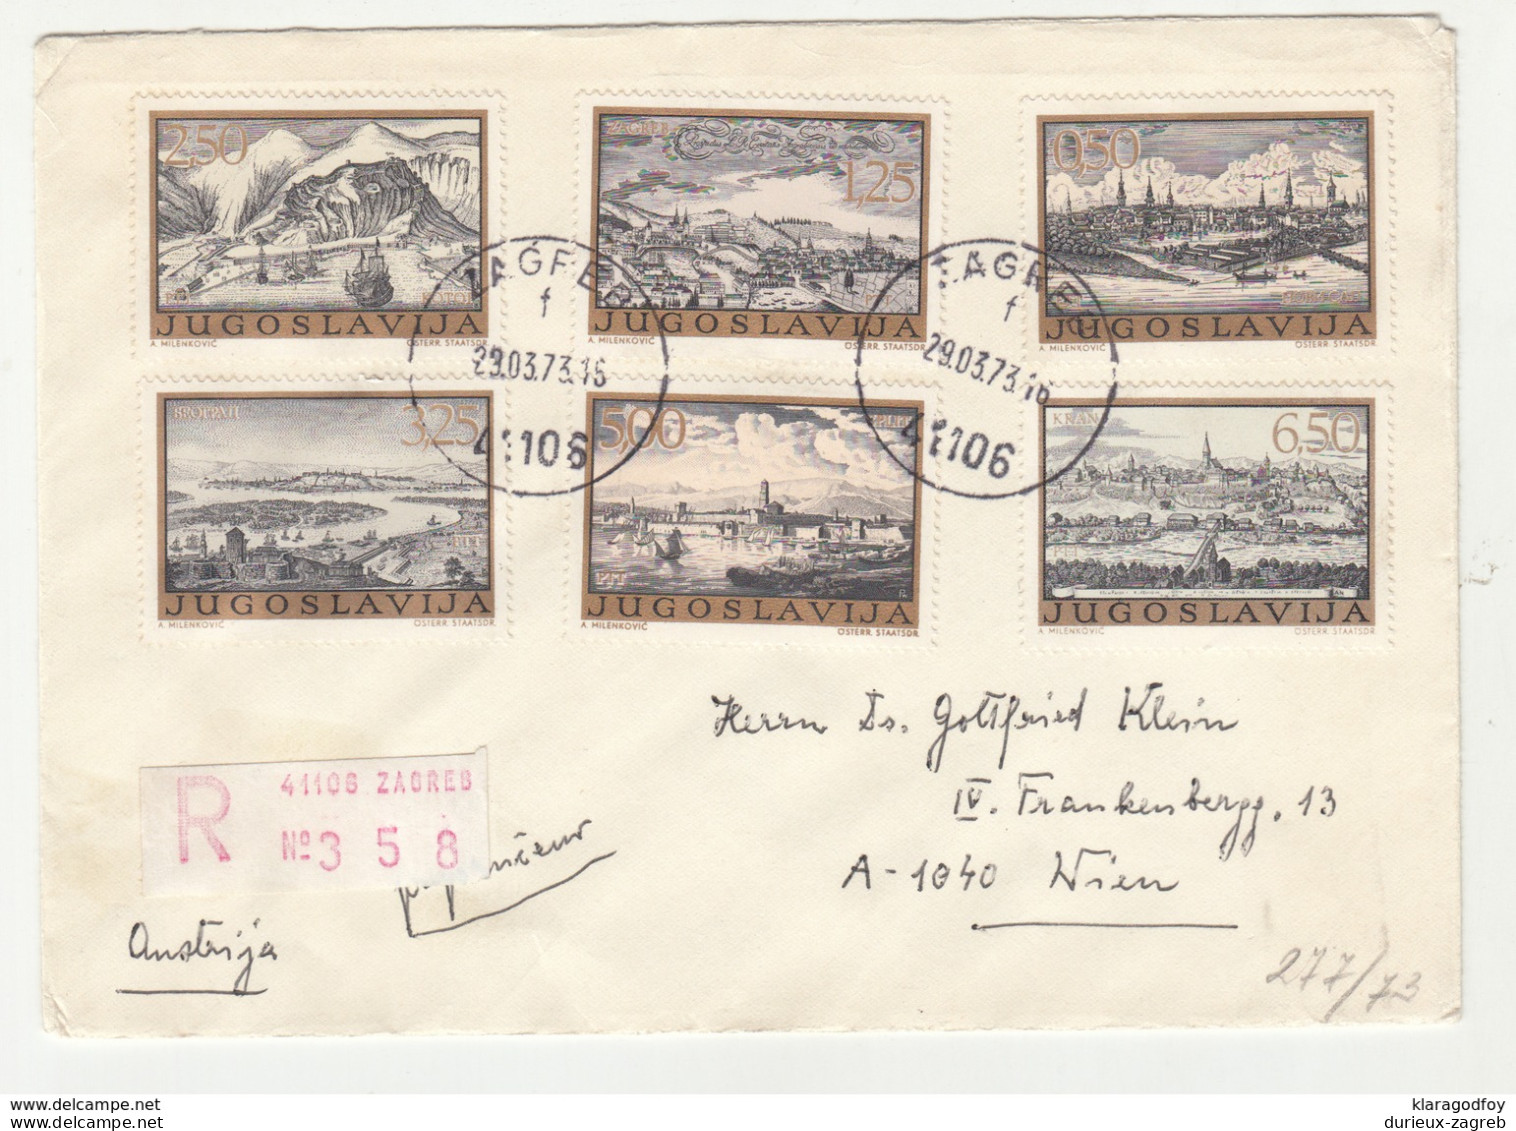 Yugoslavia Multifranked Letter Cover Travelled Registered 1973 Zagreb To Wien B190720 - Covers & Documents